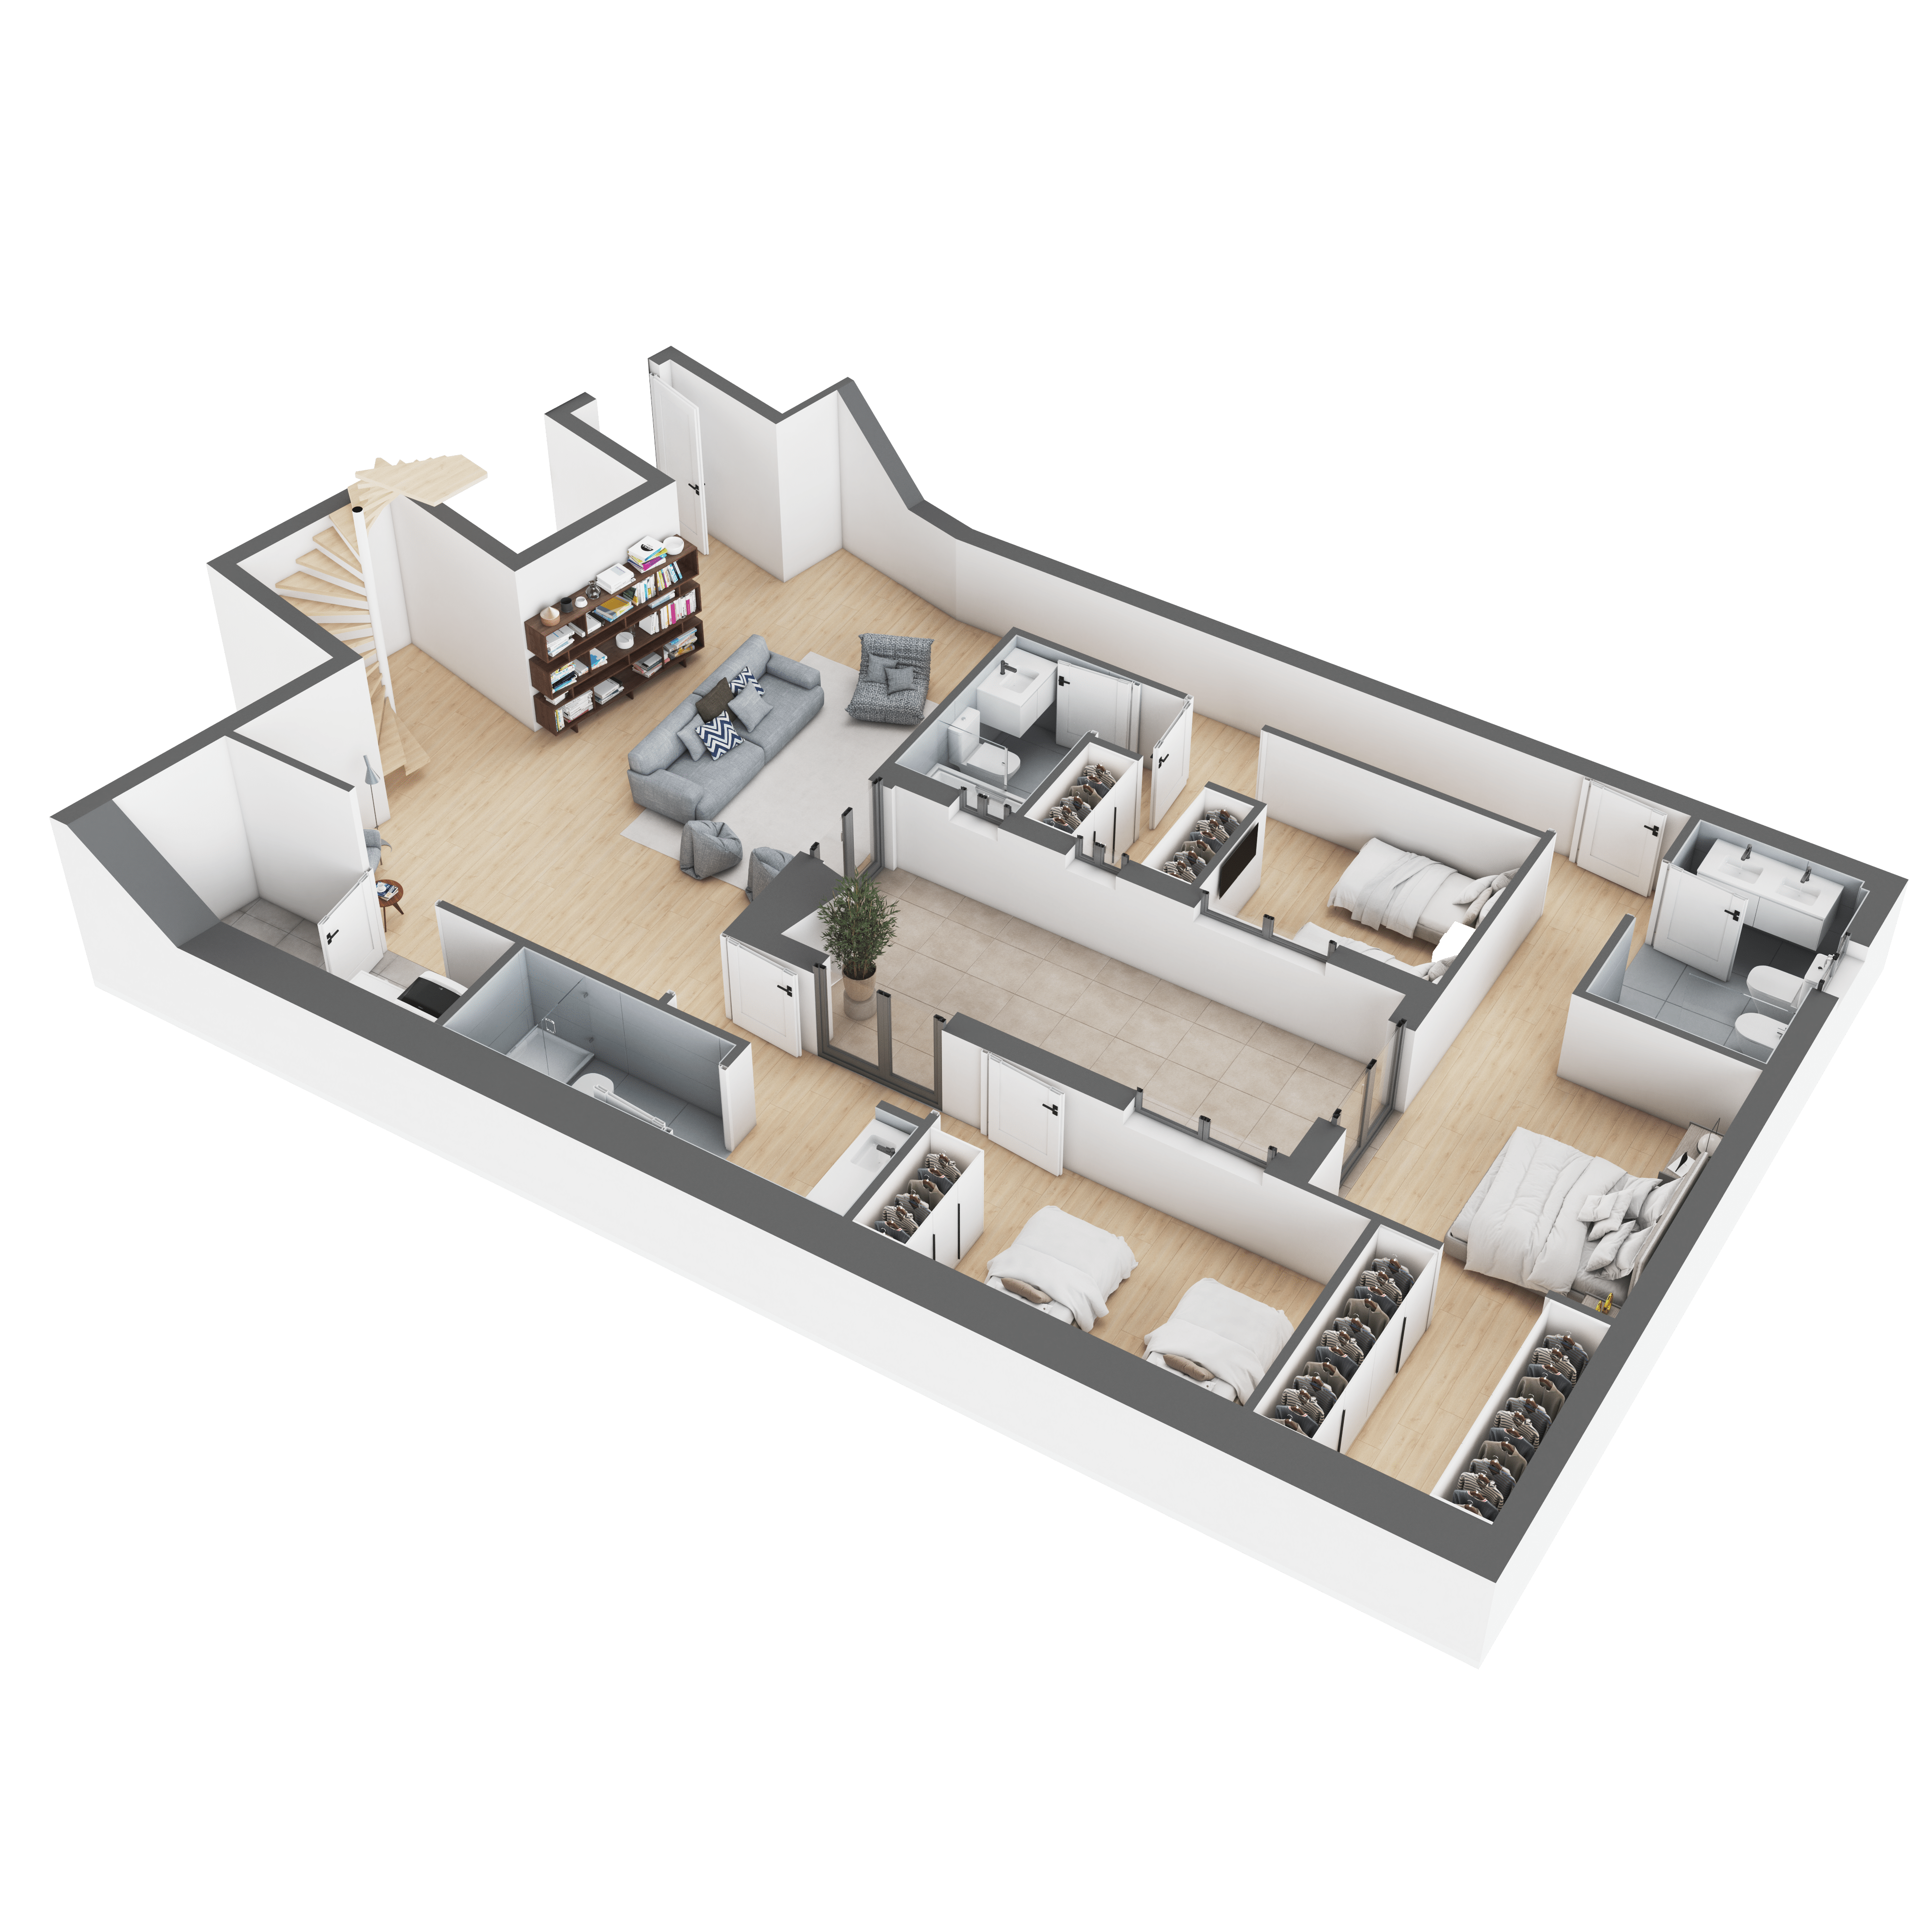 Architectural 3d model rendering of apartment in hong kong, 3 bedroom, 1500 square feet, interior balcony and skylight, open kitchen for real estate firm